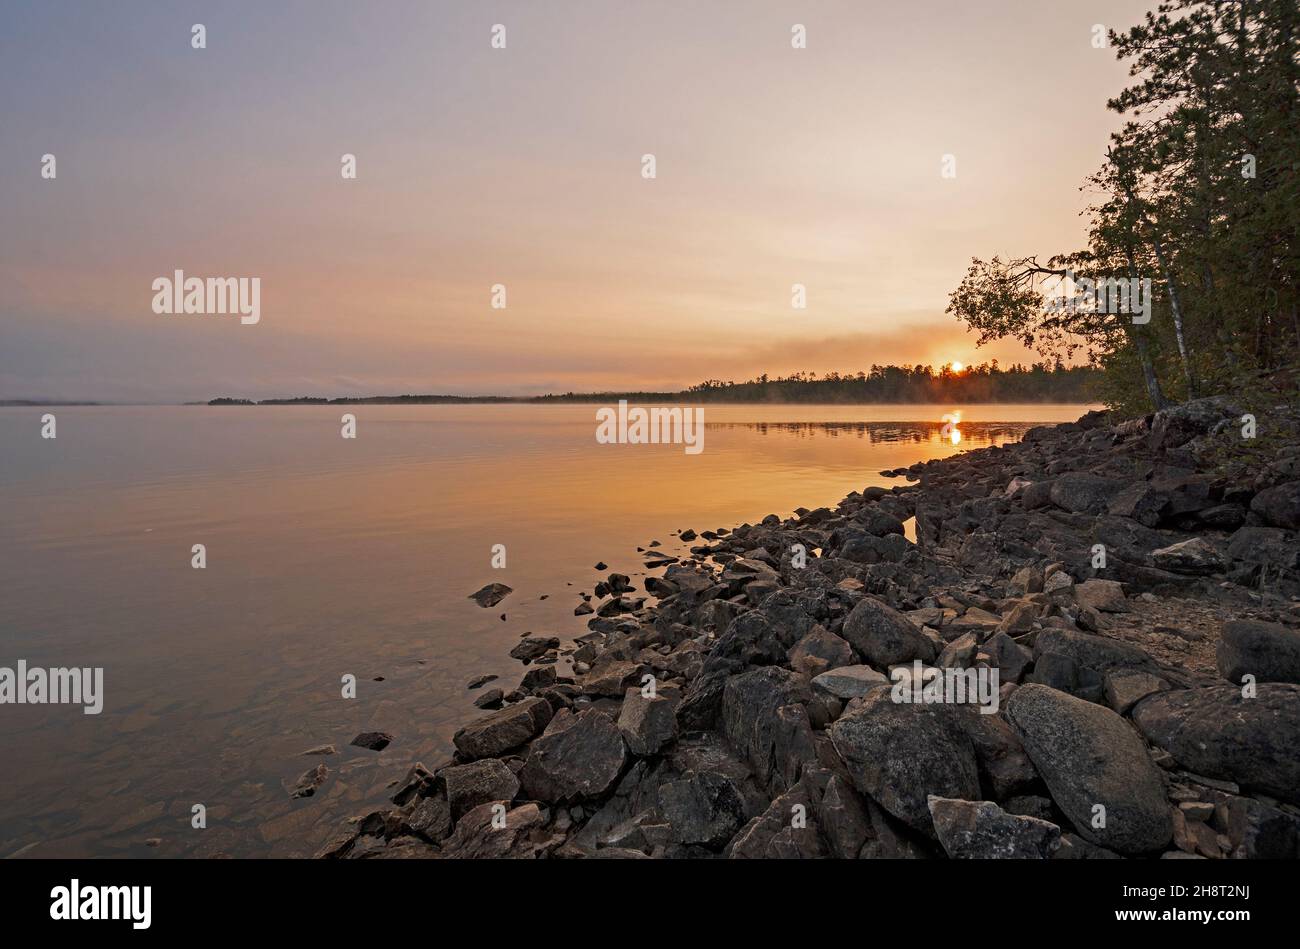 The Sun Rising Onto Calm Waters in the Morning on Saganaga Lake in the Boundary Waters in Minnesota Stock Photo